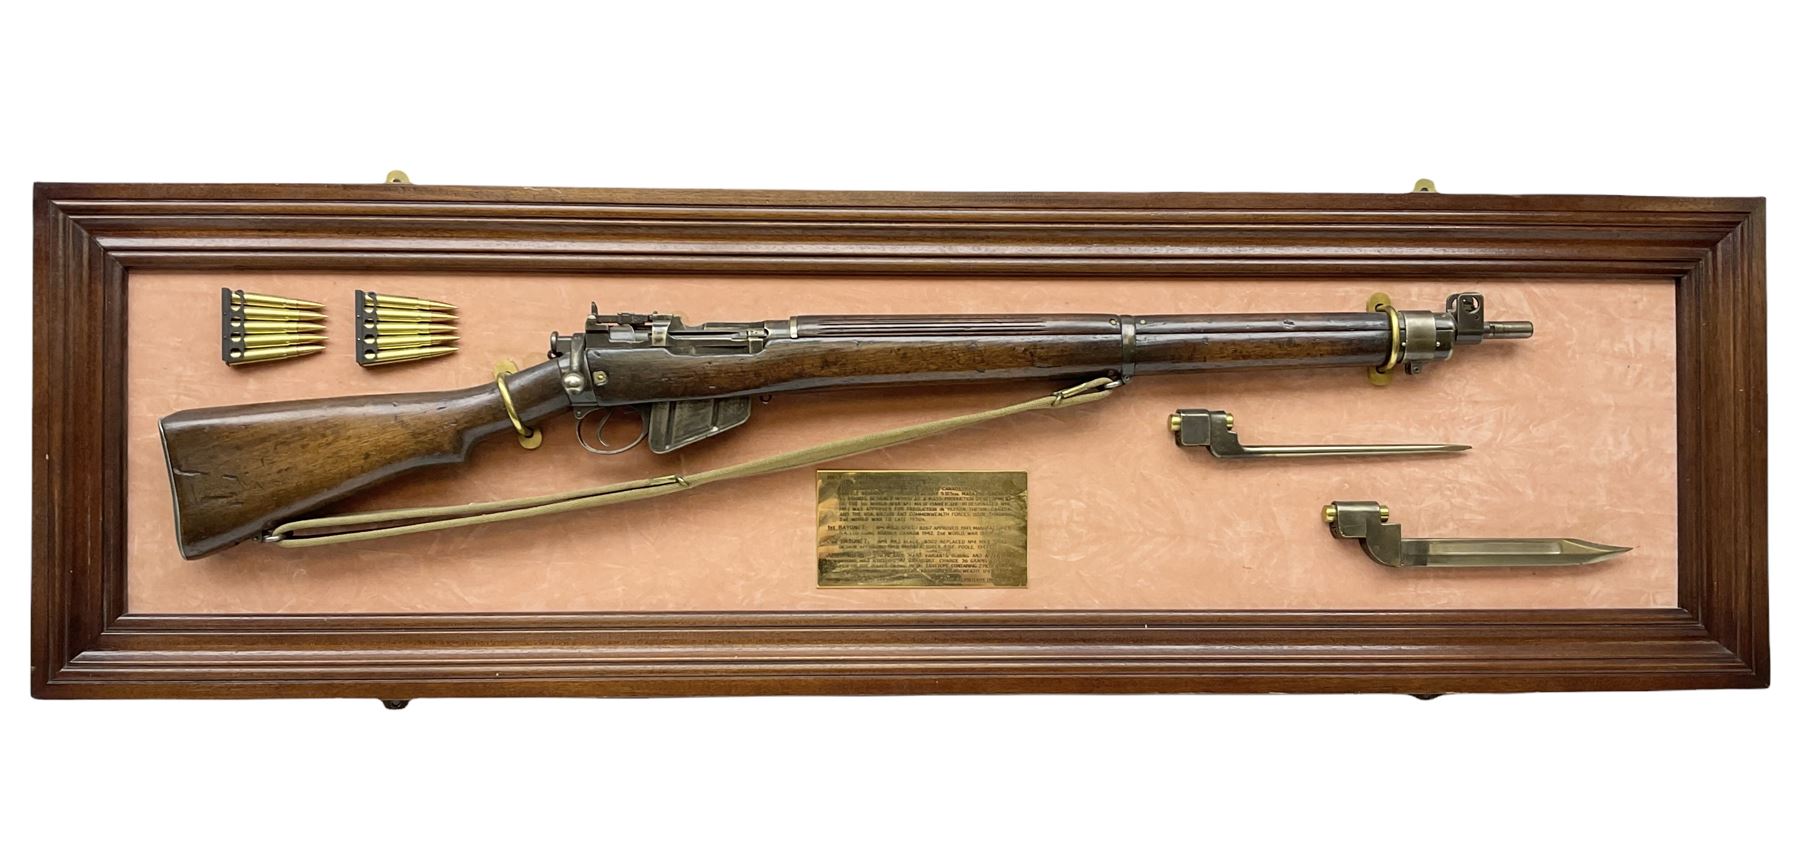 Sold at Auction: British LEE-ENFIELD No4 Mk 1 Sporterized 303